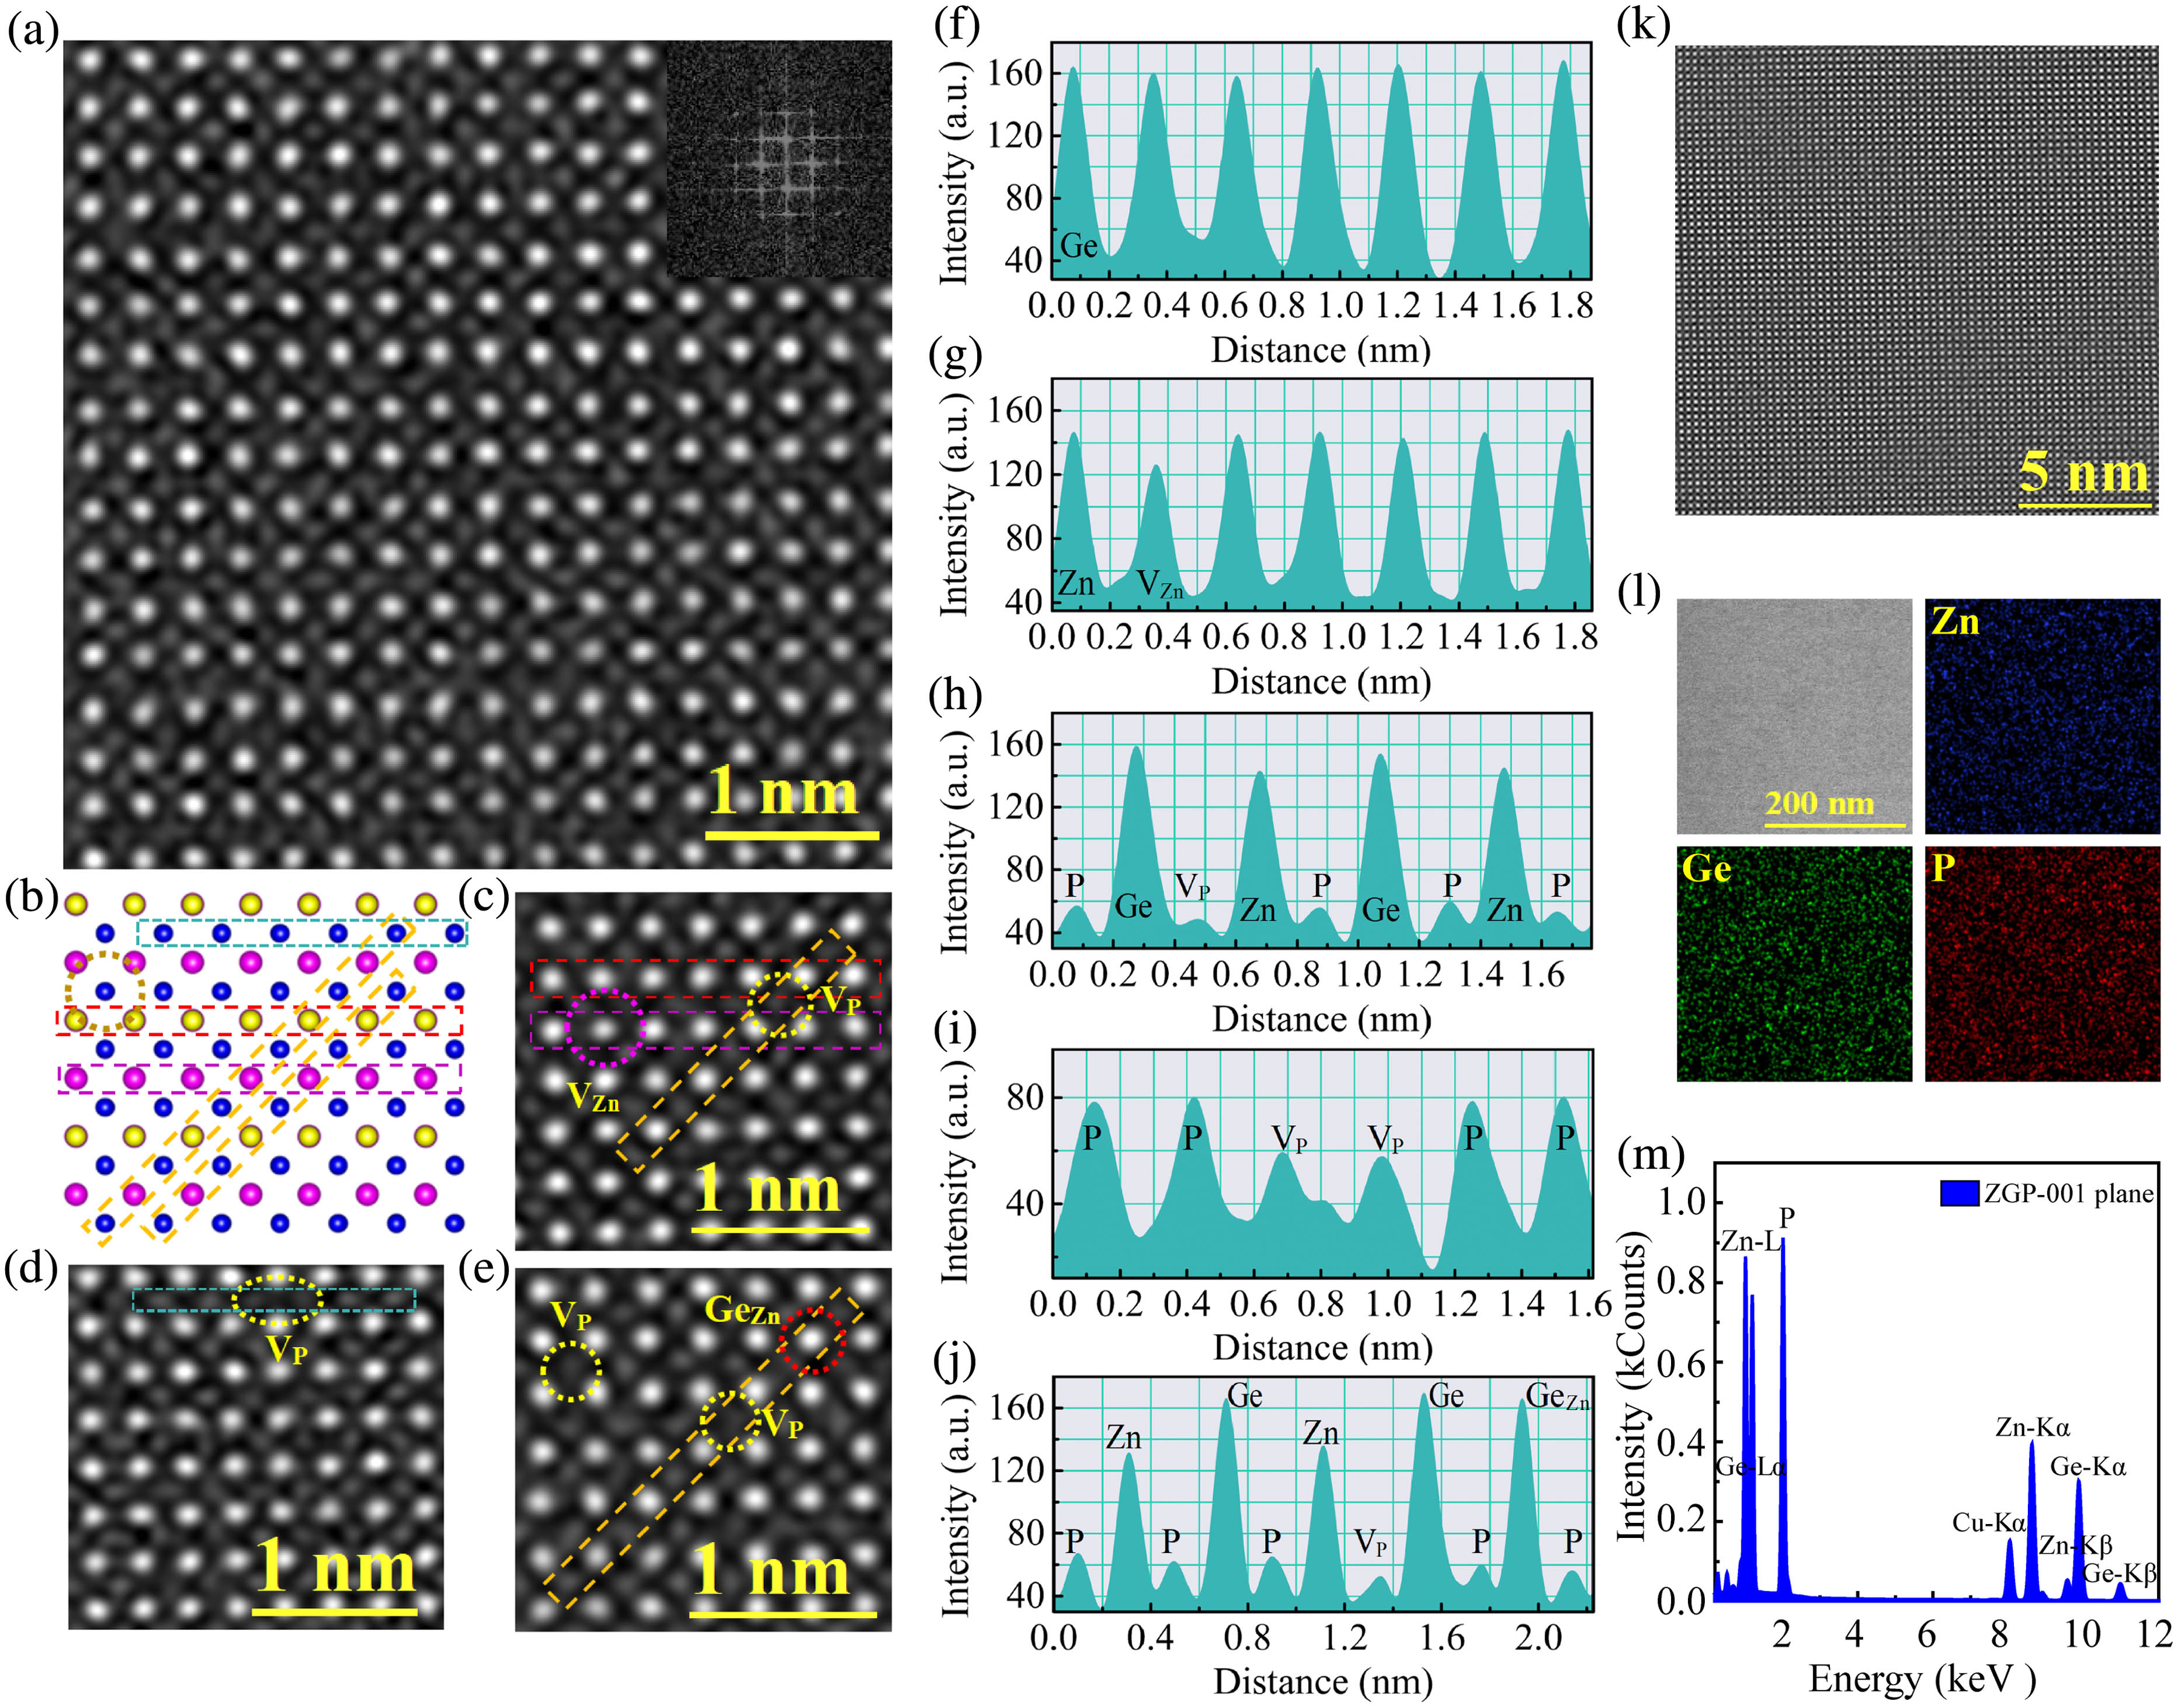 (a) HAADF-STEM images of a chalcopyrite ZGP nanoplate. Inset, FFT patterns of the (001) plane from the image. (b)–(j) Lattice line profiles of the ZGP nanoplate (001) plane. The zoomed HAADF-STEM images are processed to increase the contrast. The dashed rectangles with red, pink, orange, and light blue colors are marked on both the atomic models and corresponding zoomed STEM images to show the defects. The Zn vacancy, P vacancy, and GeZn antisite are shown in the STEM images marked with pink, yellow, and red open rings, respectively. (k) Large-scale atomic HAADF-STEM image. (l) STEM image (upper left) and corresponding STEM-EDS chemical maps. (m) STEM-EDS pattern of a ZGP nanoplate.